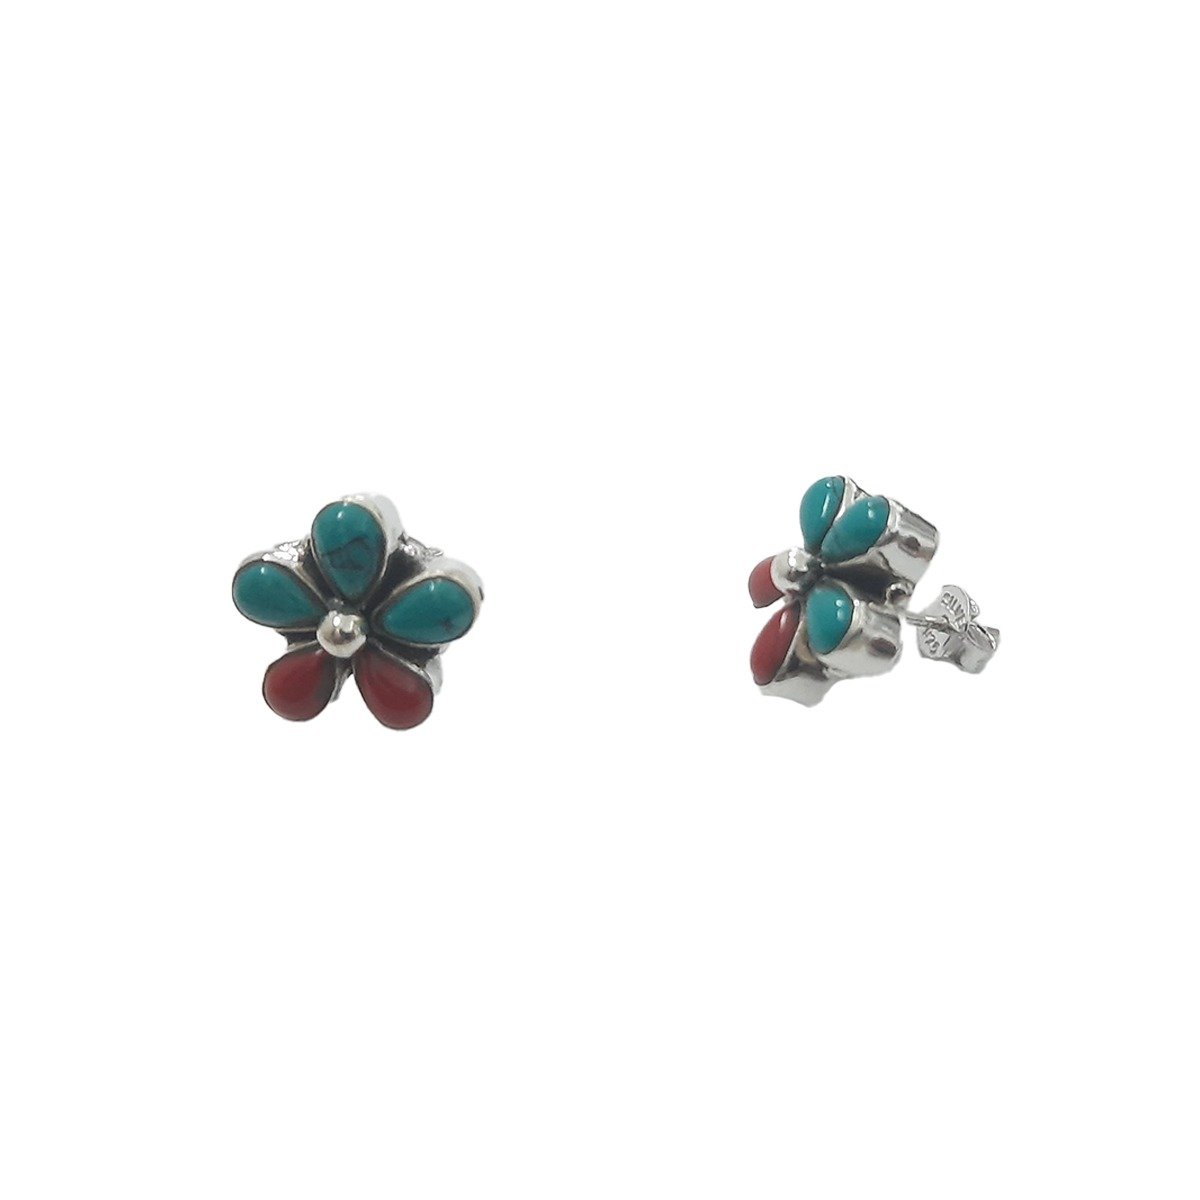 TURQUOISE CORAL STONE FLORAL EARRING IN SILVER